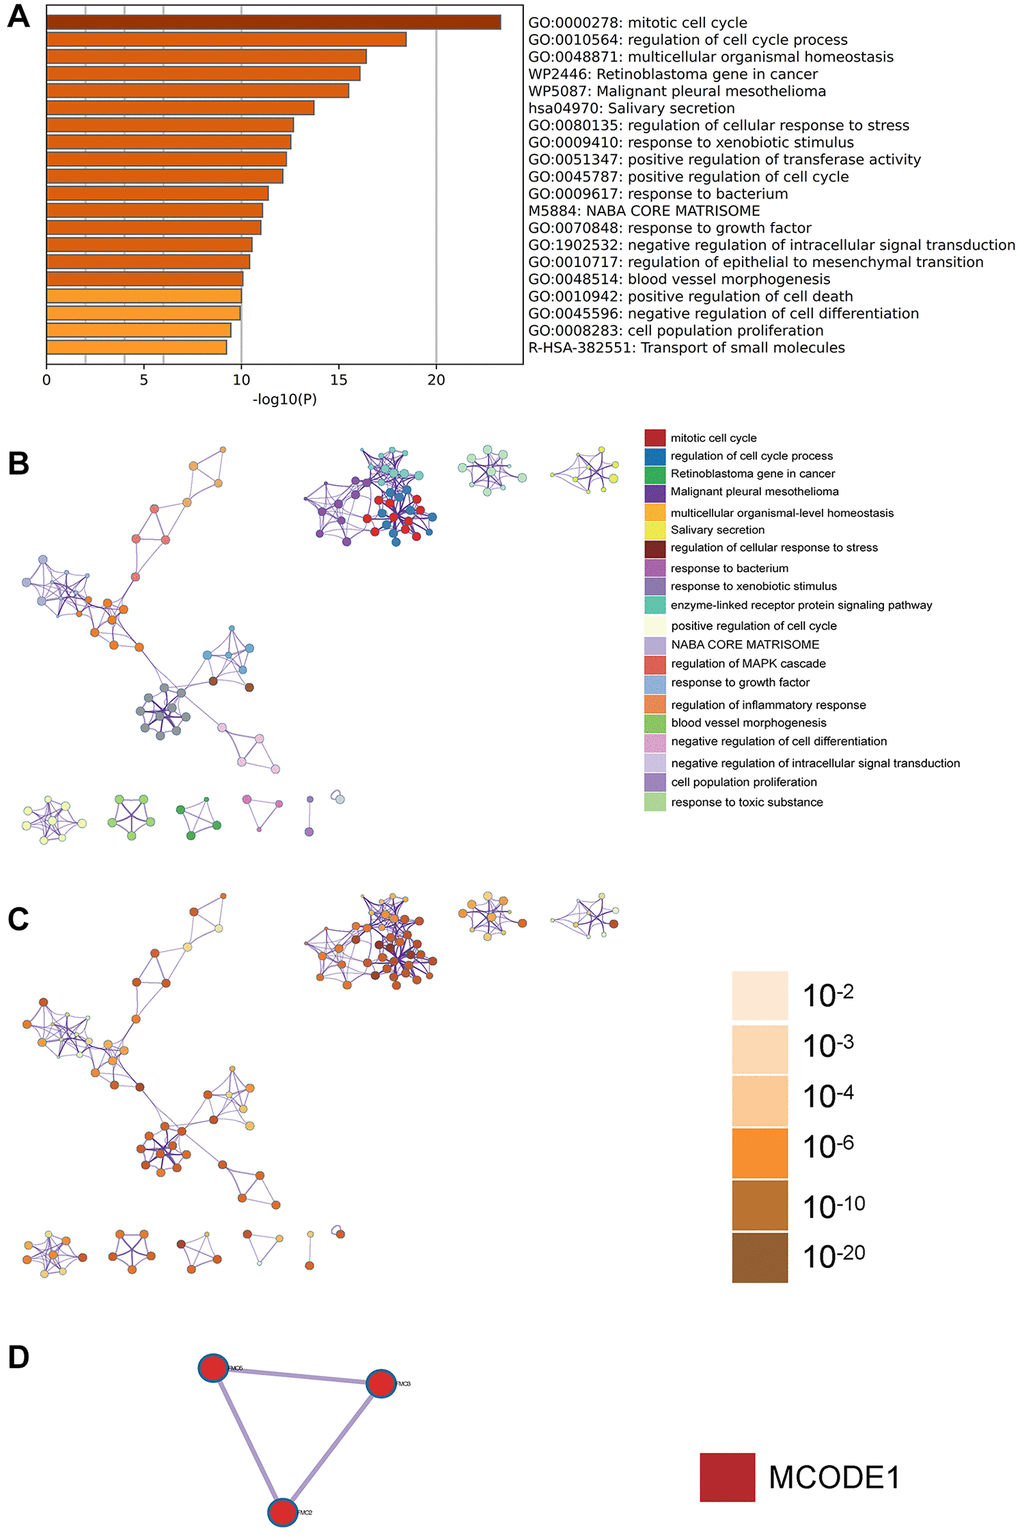 Metascape enrichment analysis. (A) GO has positive regulation of mitotic cell cycle, homeostasis in multicellular organisms and cell cycle. (B–D) Enrichment networks colored by enrichment terms; enrichment networks colored by p-values; Metascape enrichment analysis. Visually represent the correlation and confidence of each enrichment project.